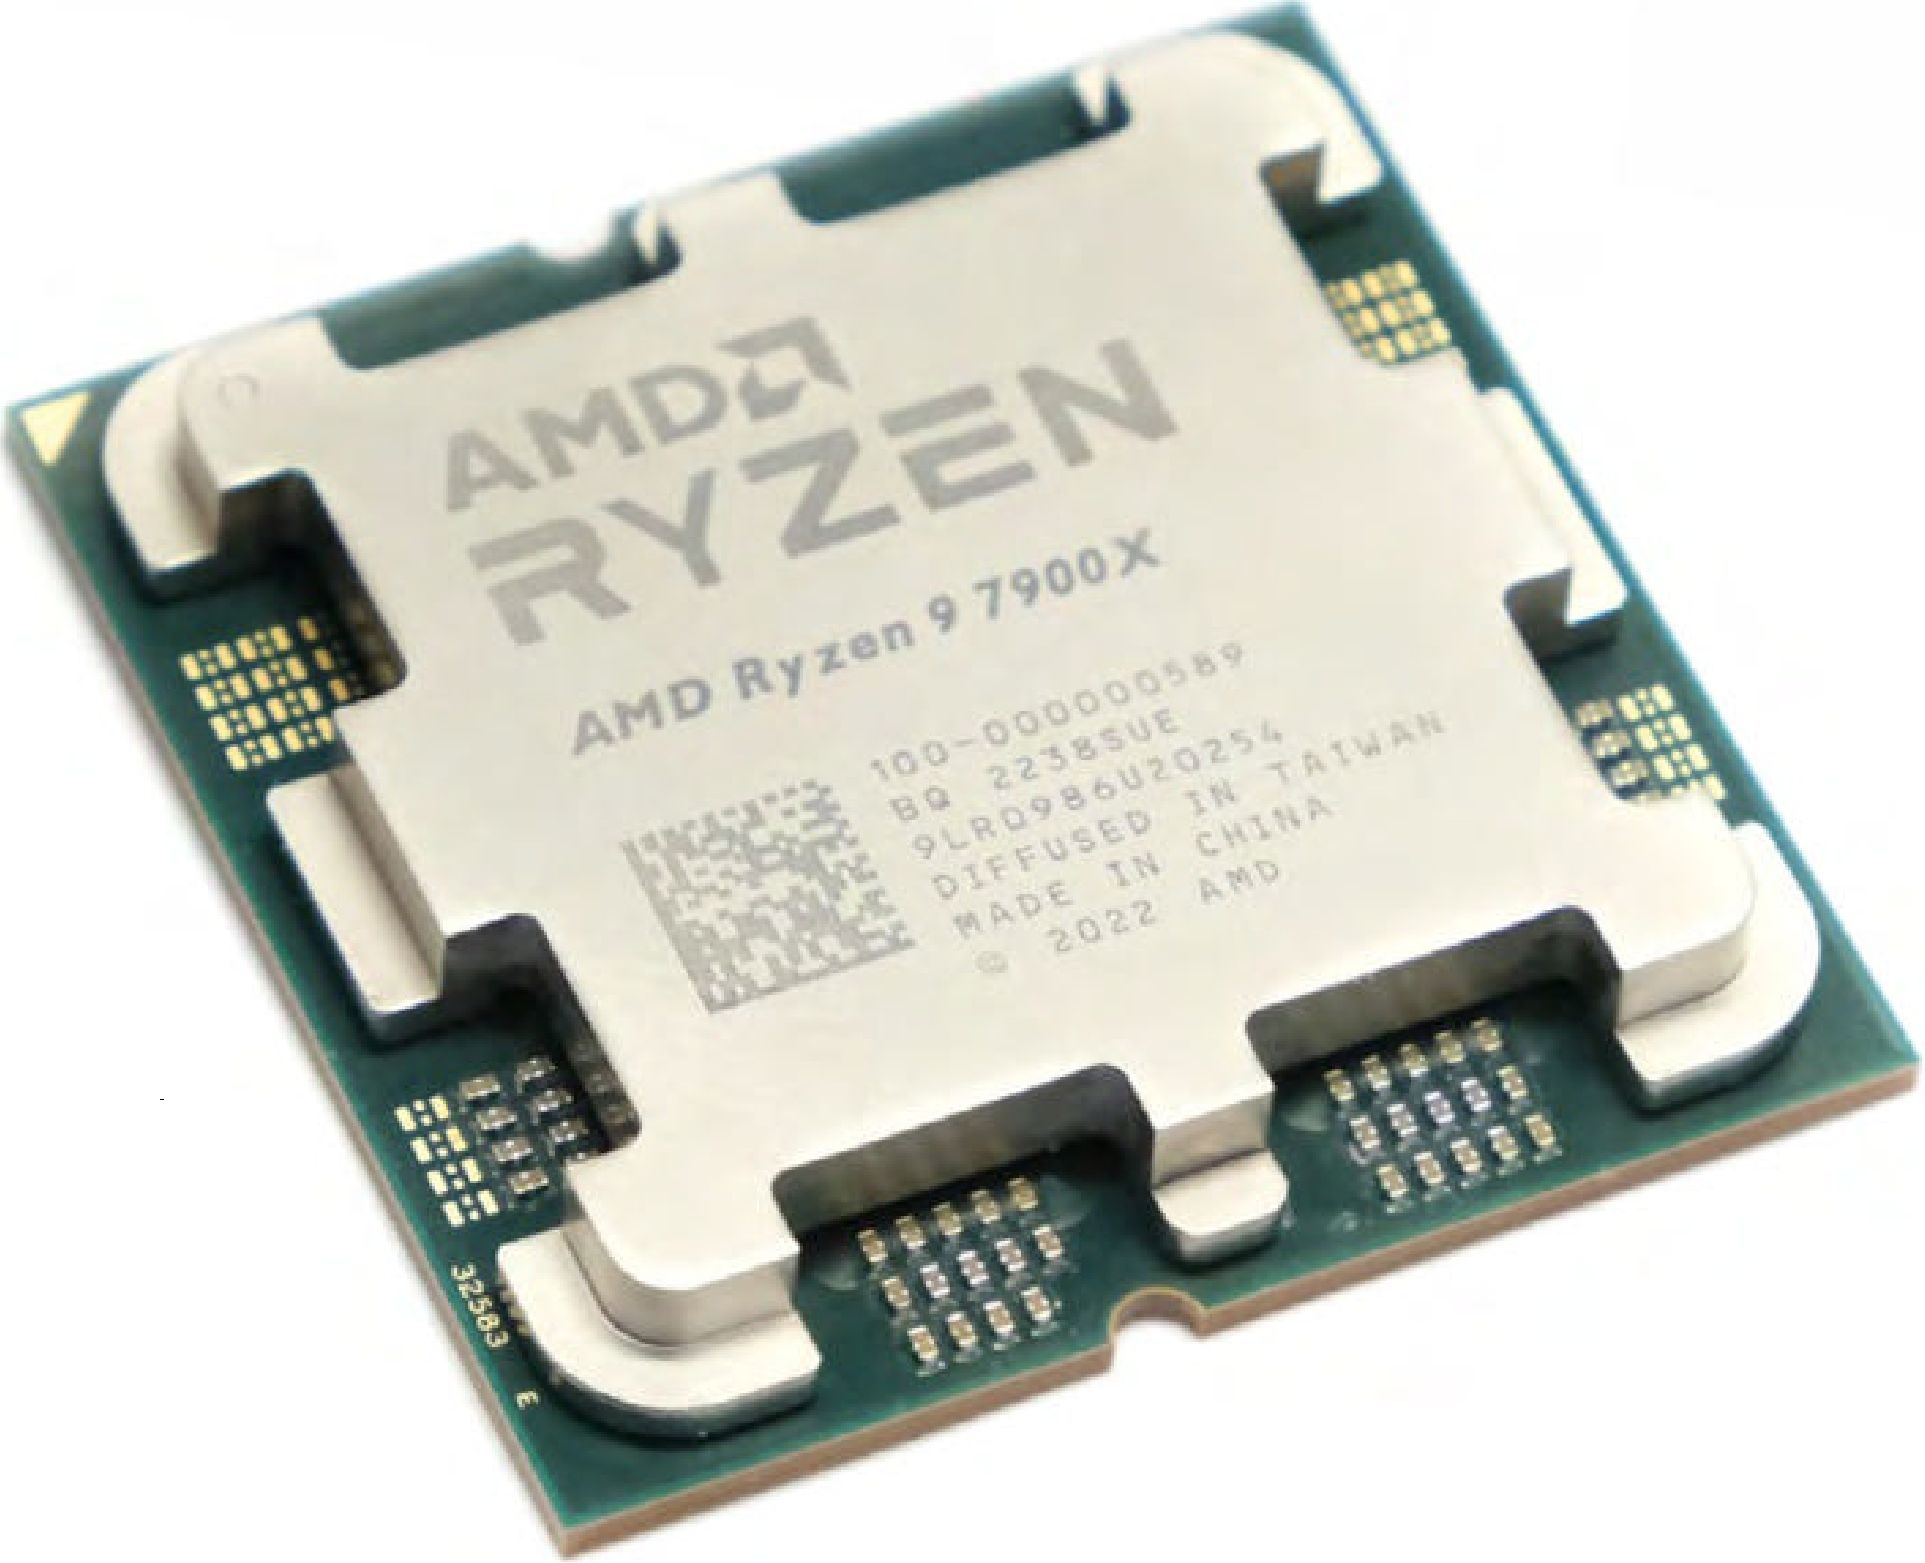 AMD RYZEN 9 7900X Review « TOP NEW Review